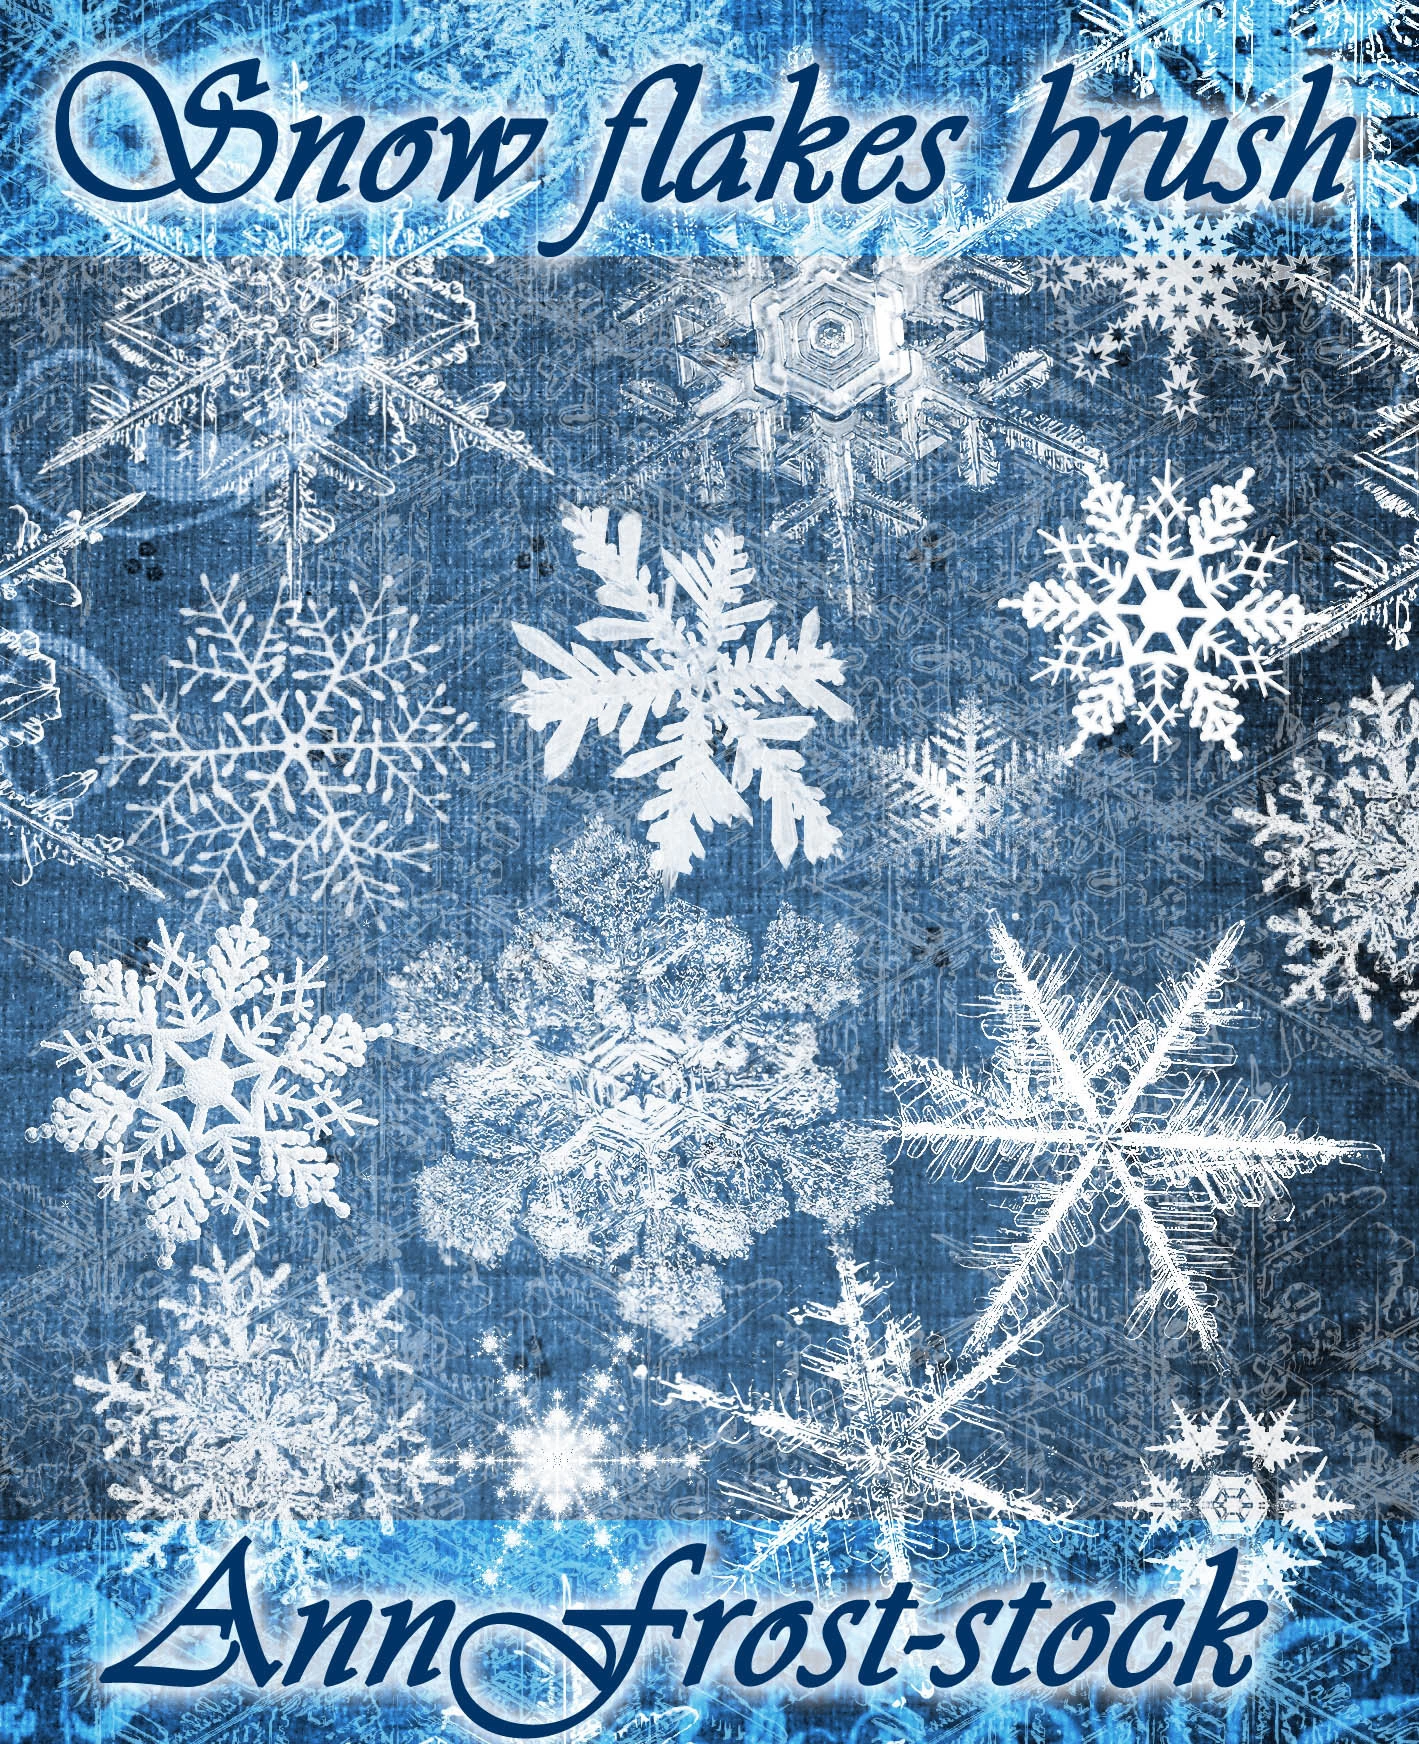 snow_flakes_brush_by_annfrost_stock